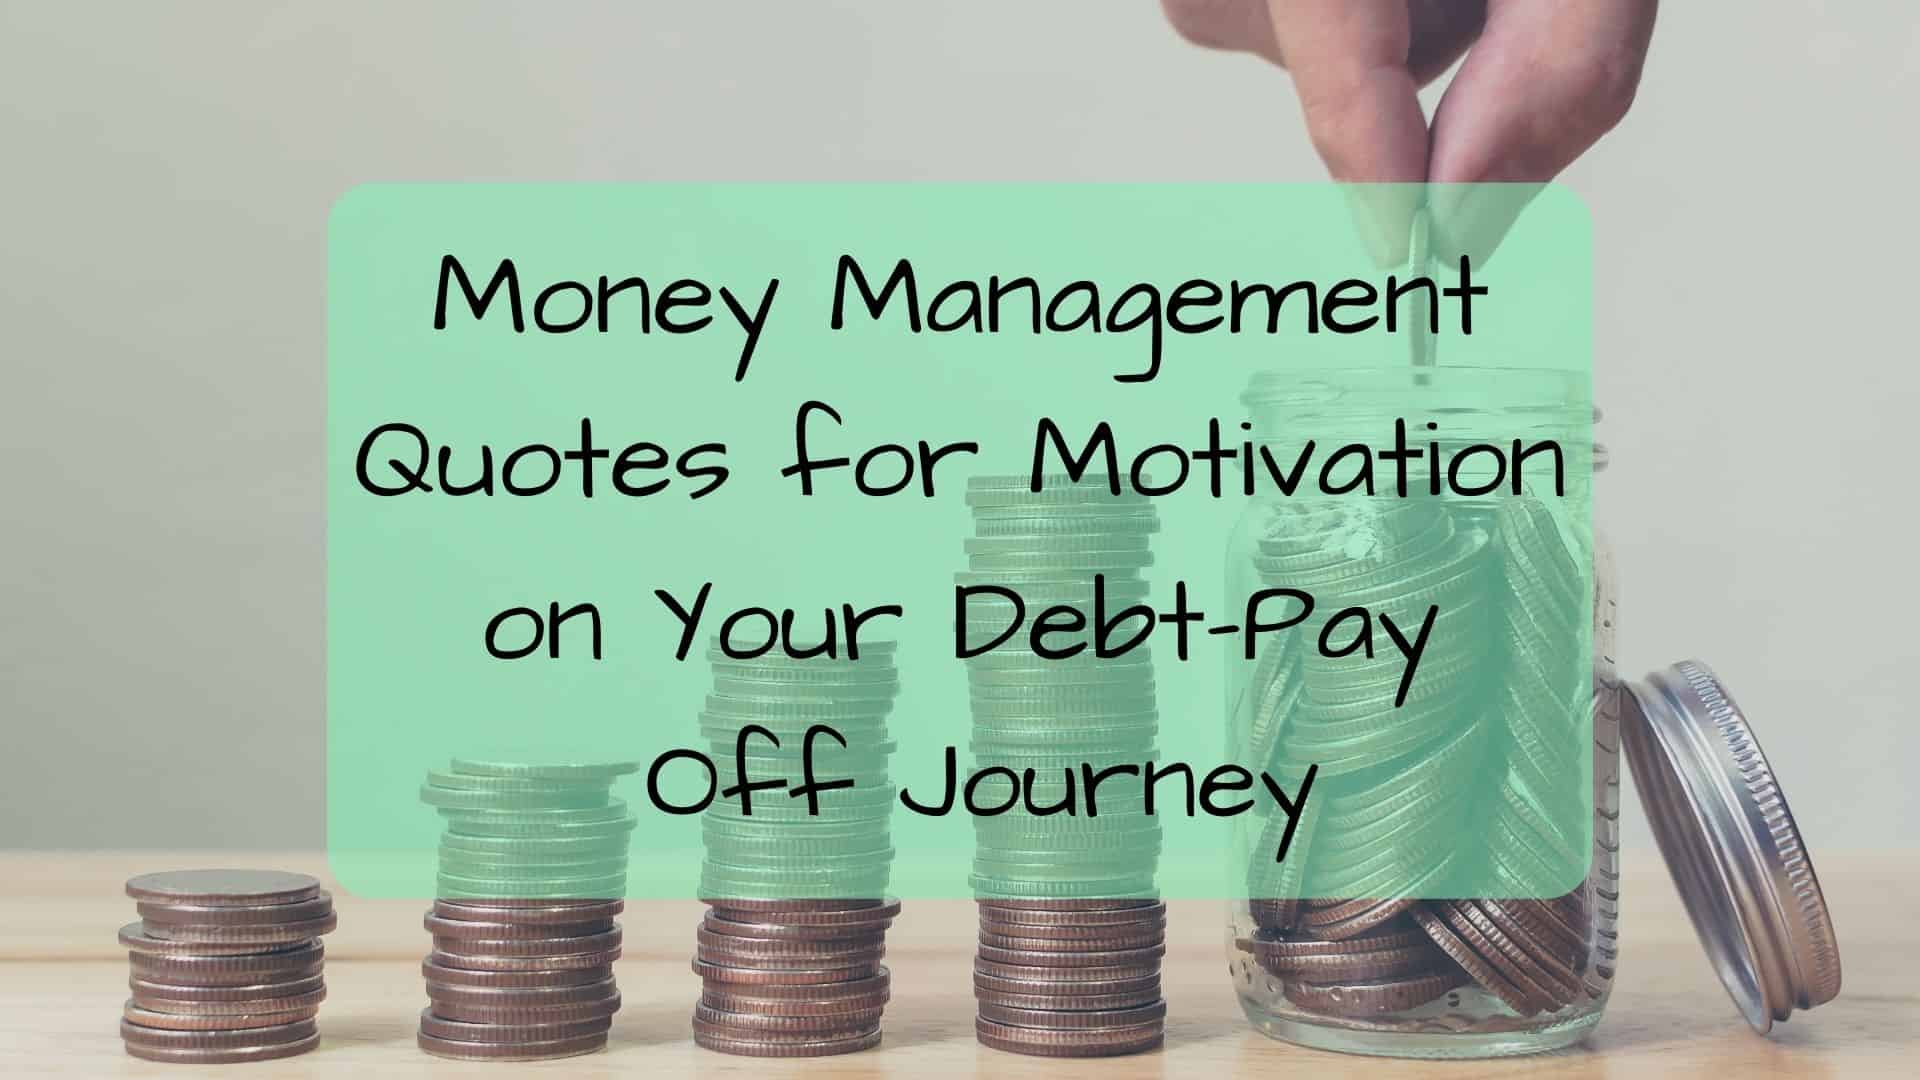 Money Management Quotes for Motivation on Your Debt-Pay Off Journey